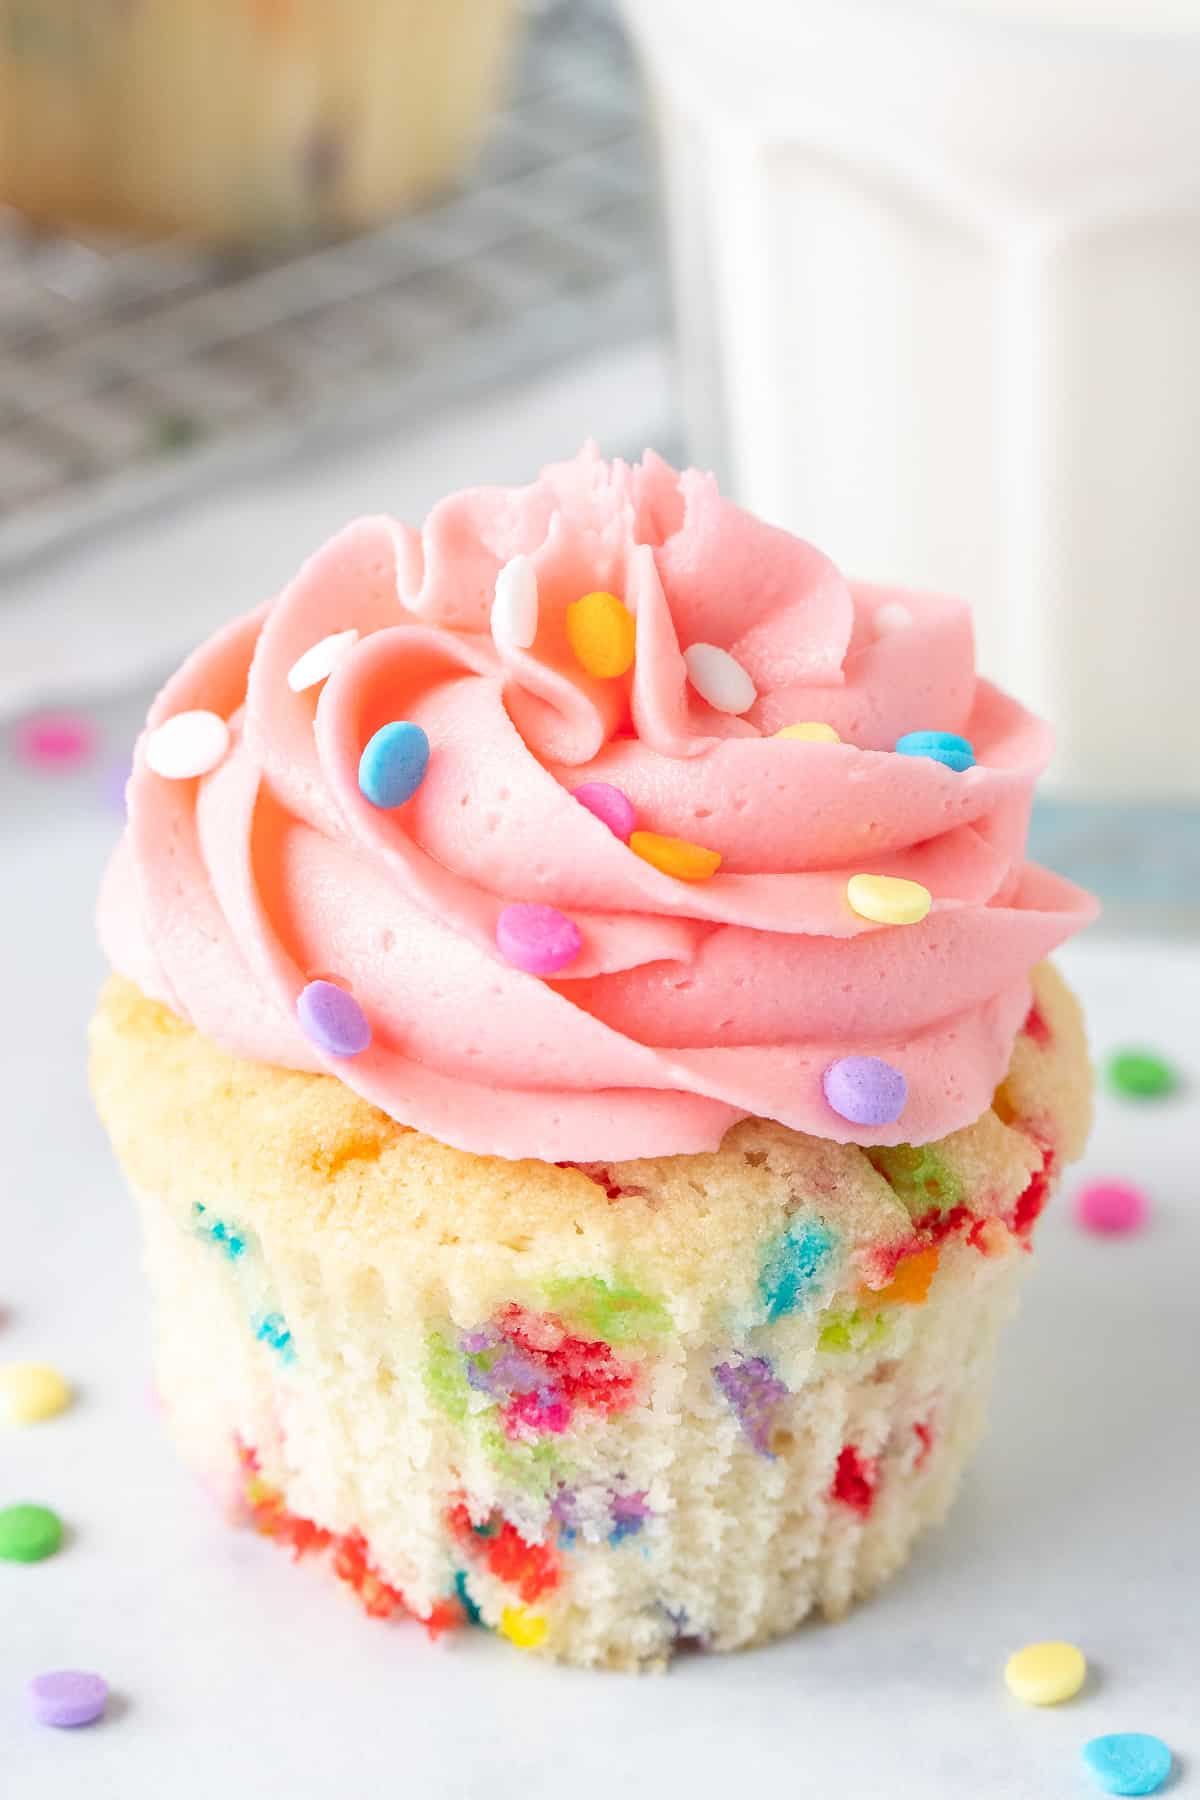 Funfetti cupcake with pink frosting and glass of milk